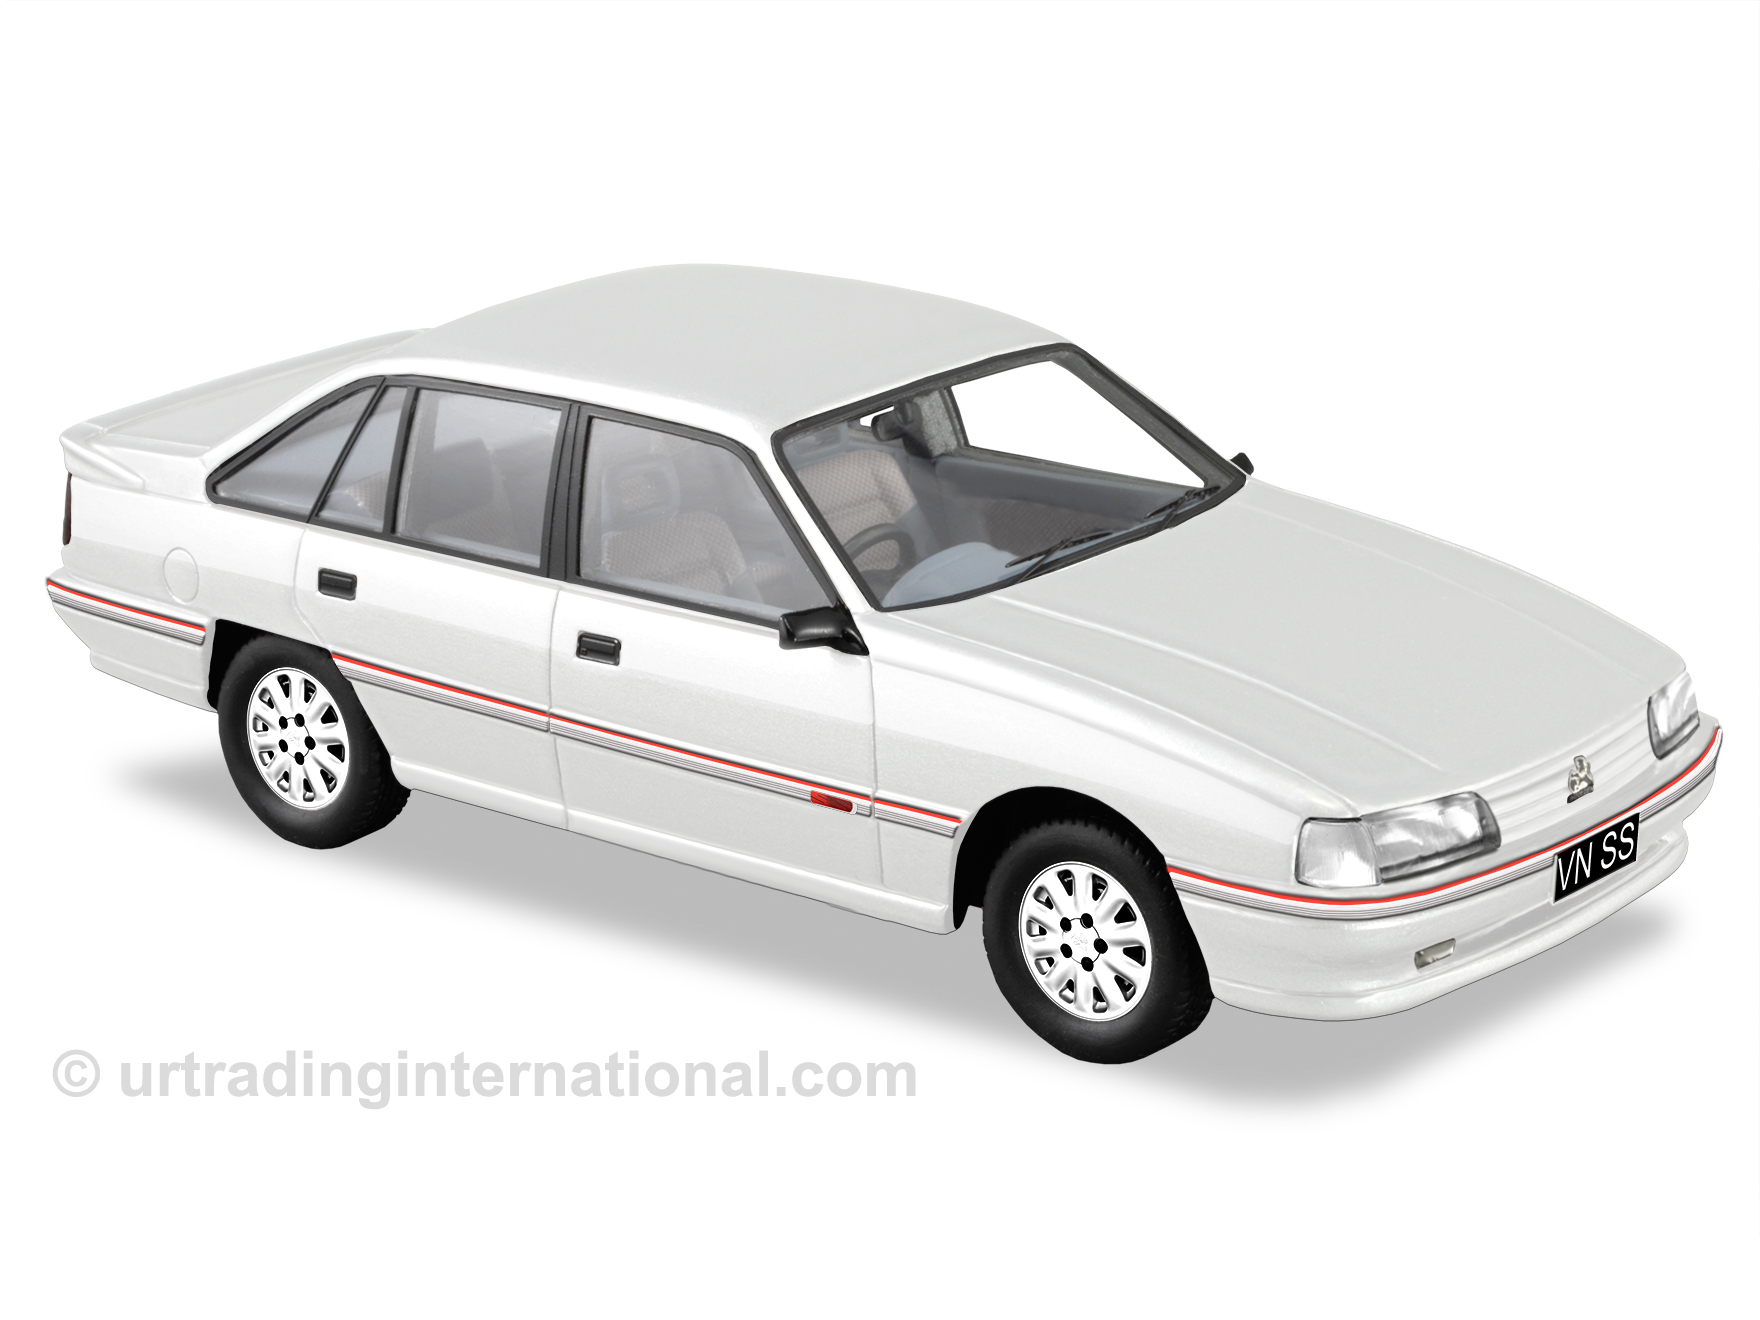 1988-91 VN SS Commodore – White